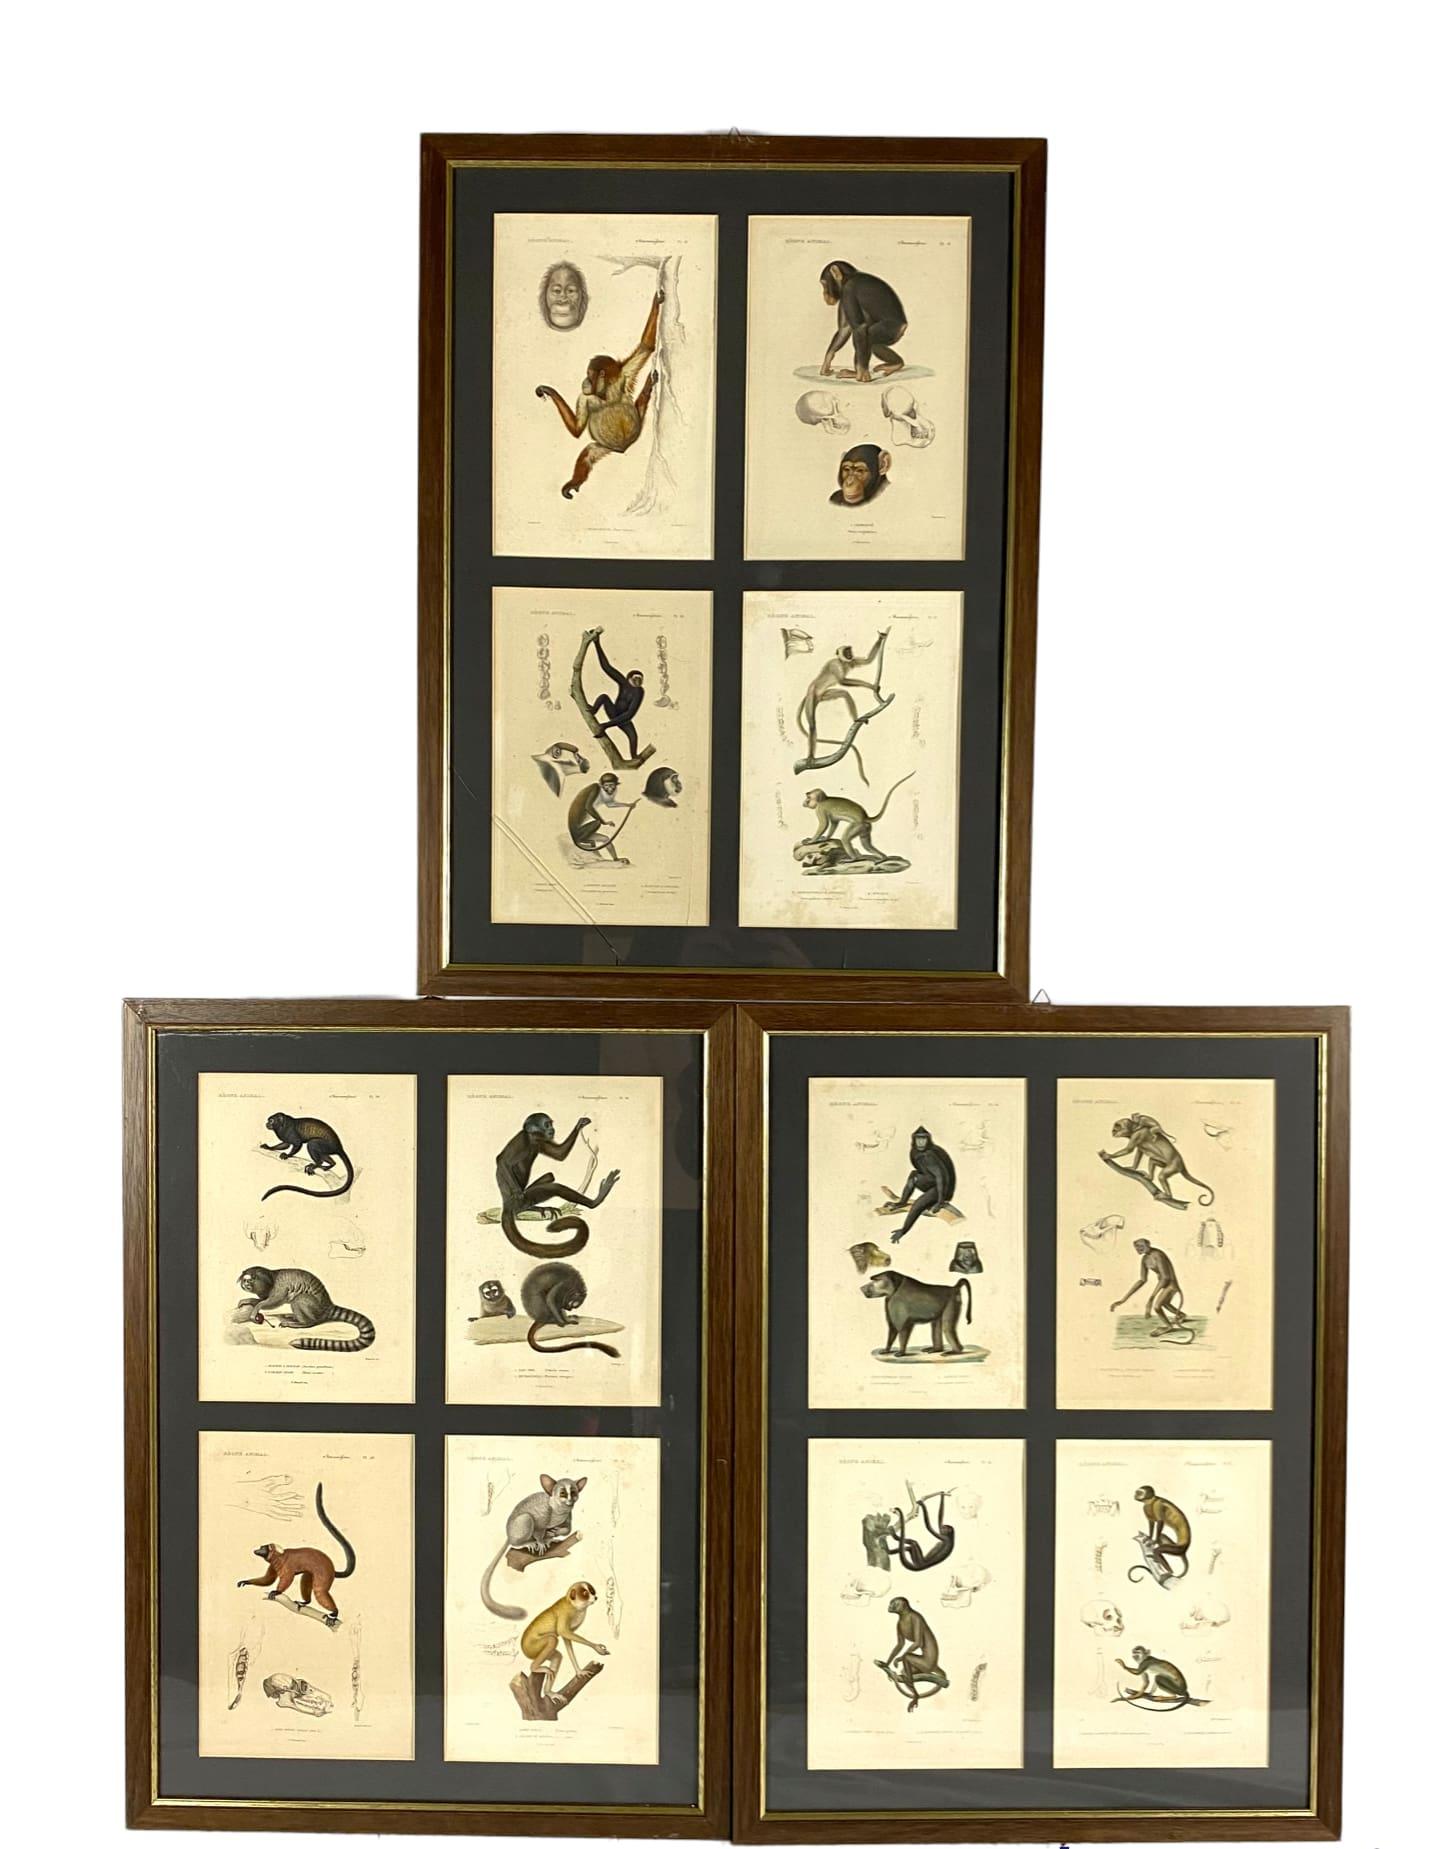 French Monkeys Prints, 12 Engravings from 